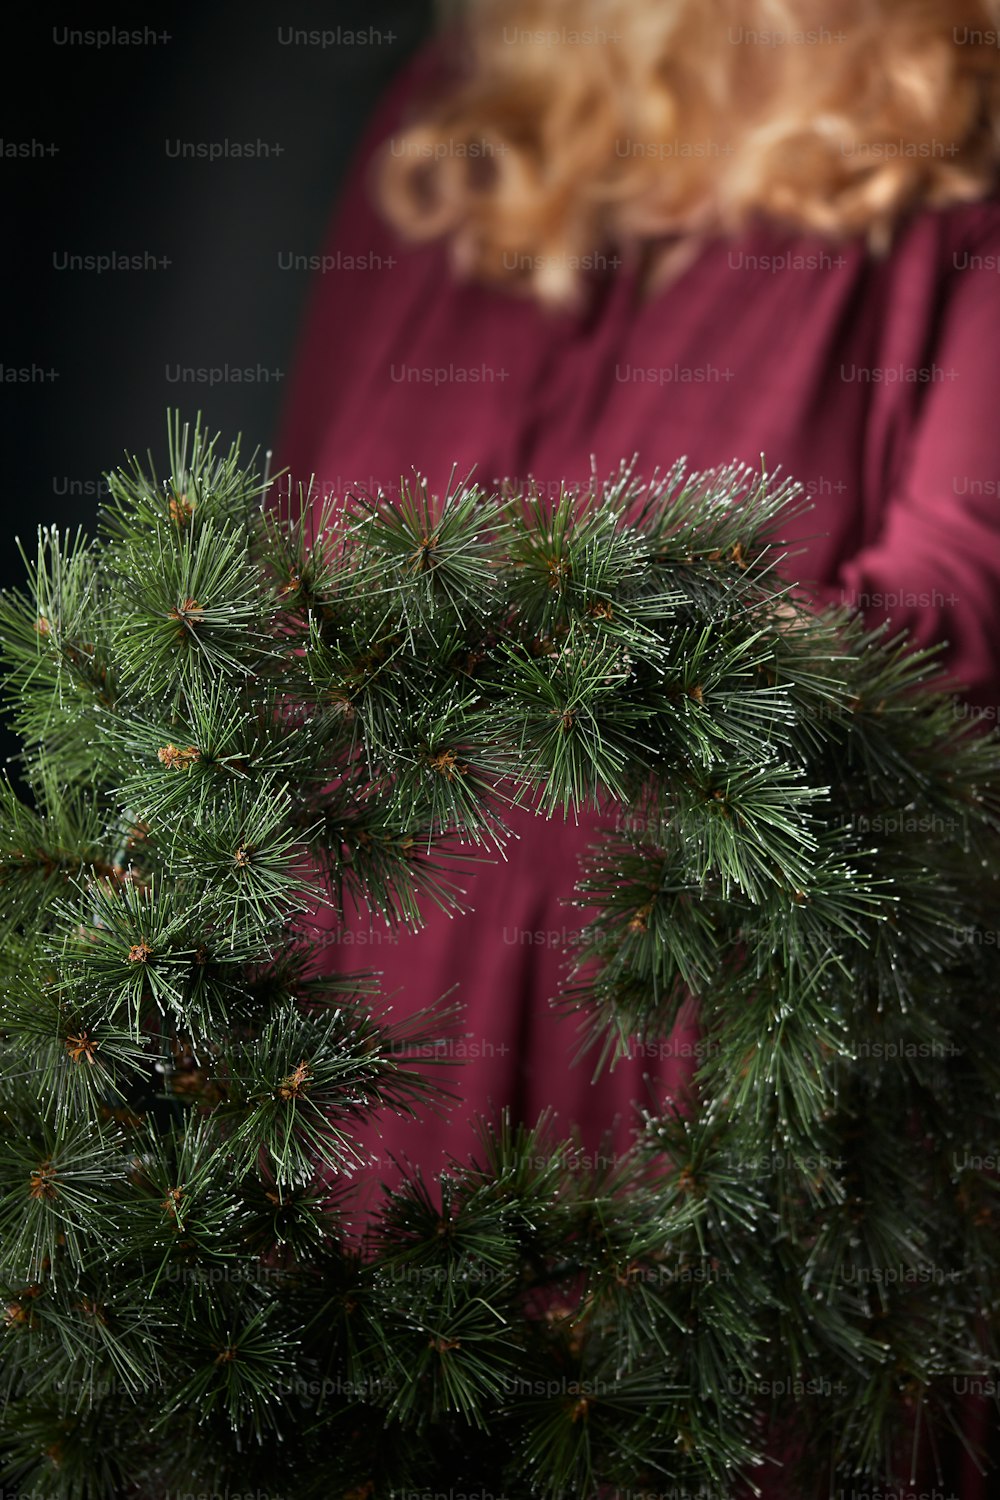 a close up of a person holding a pine tree